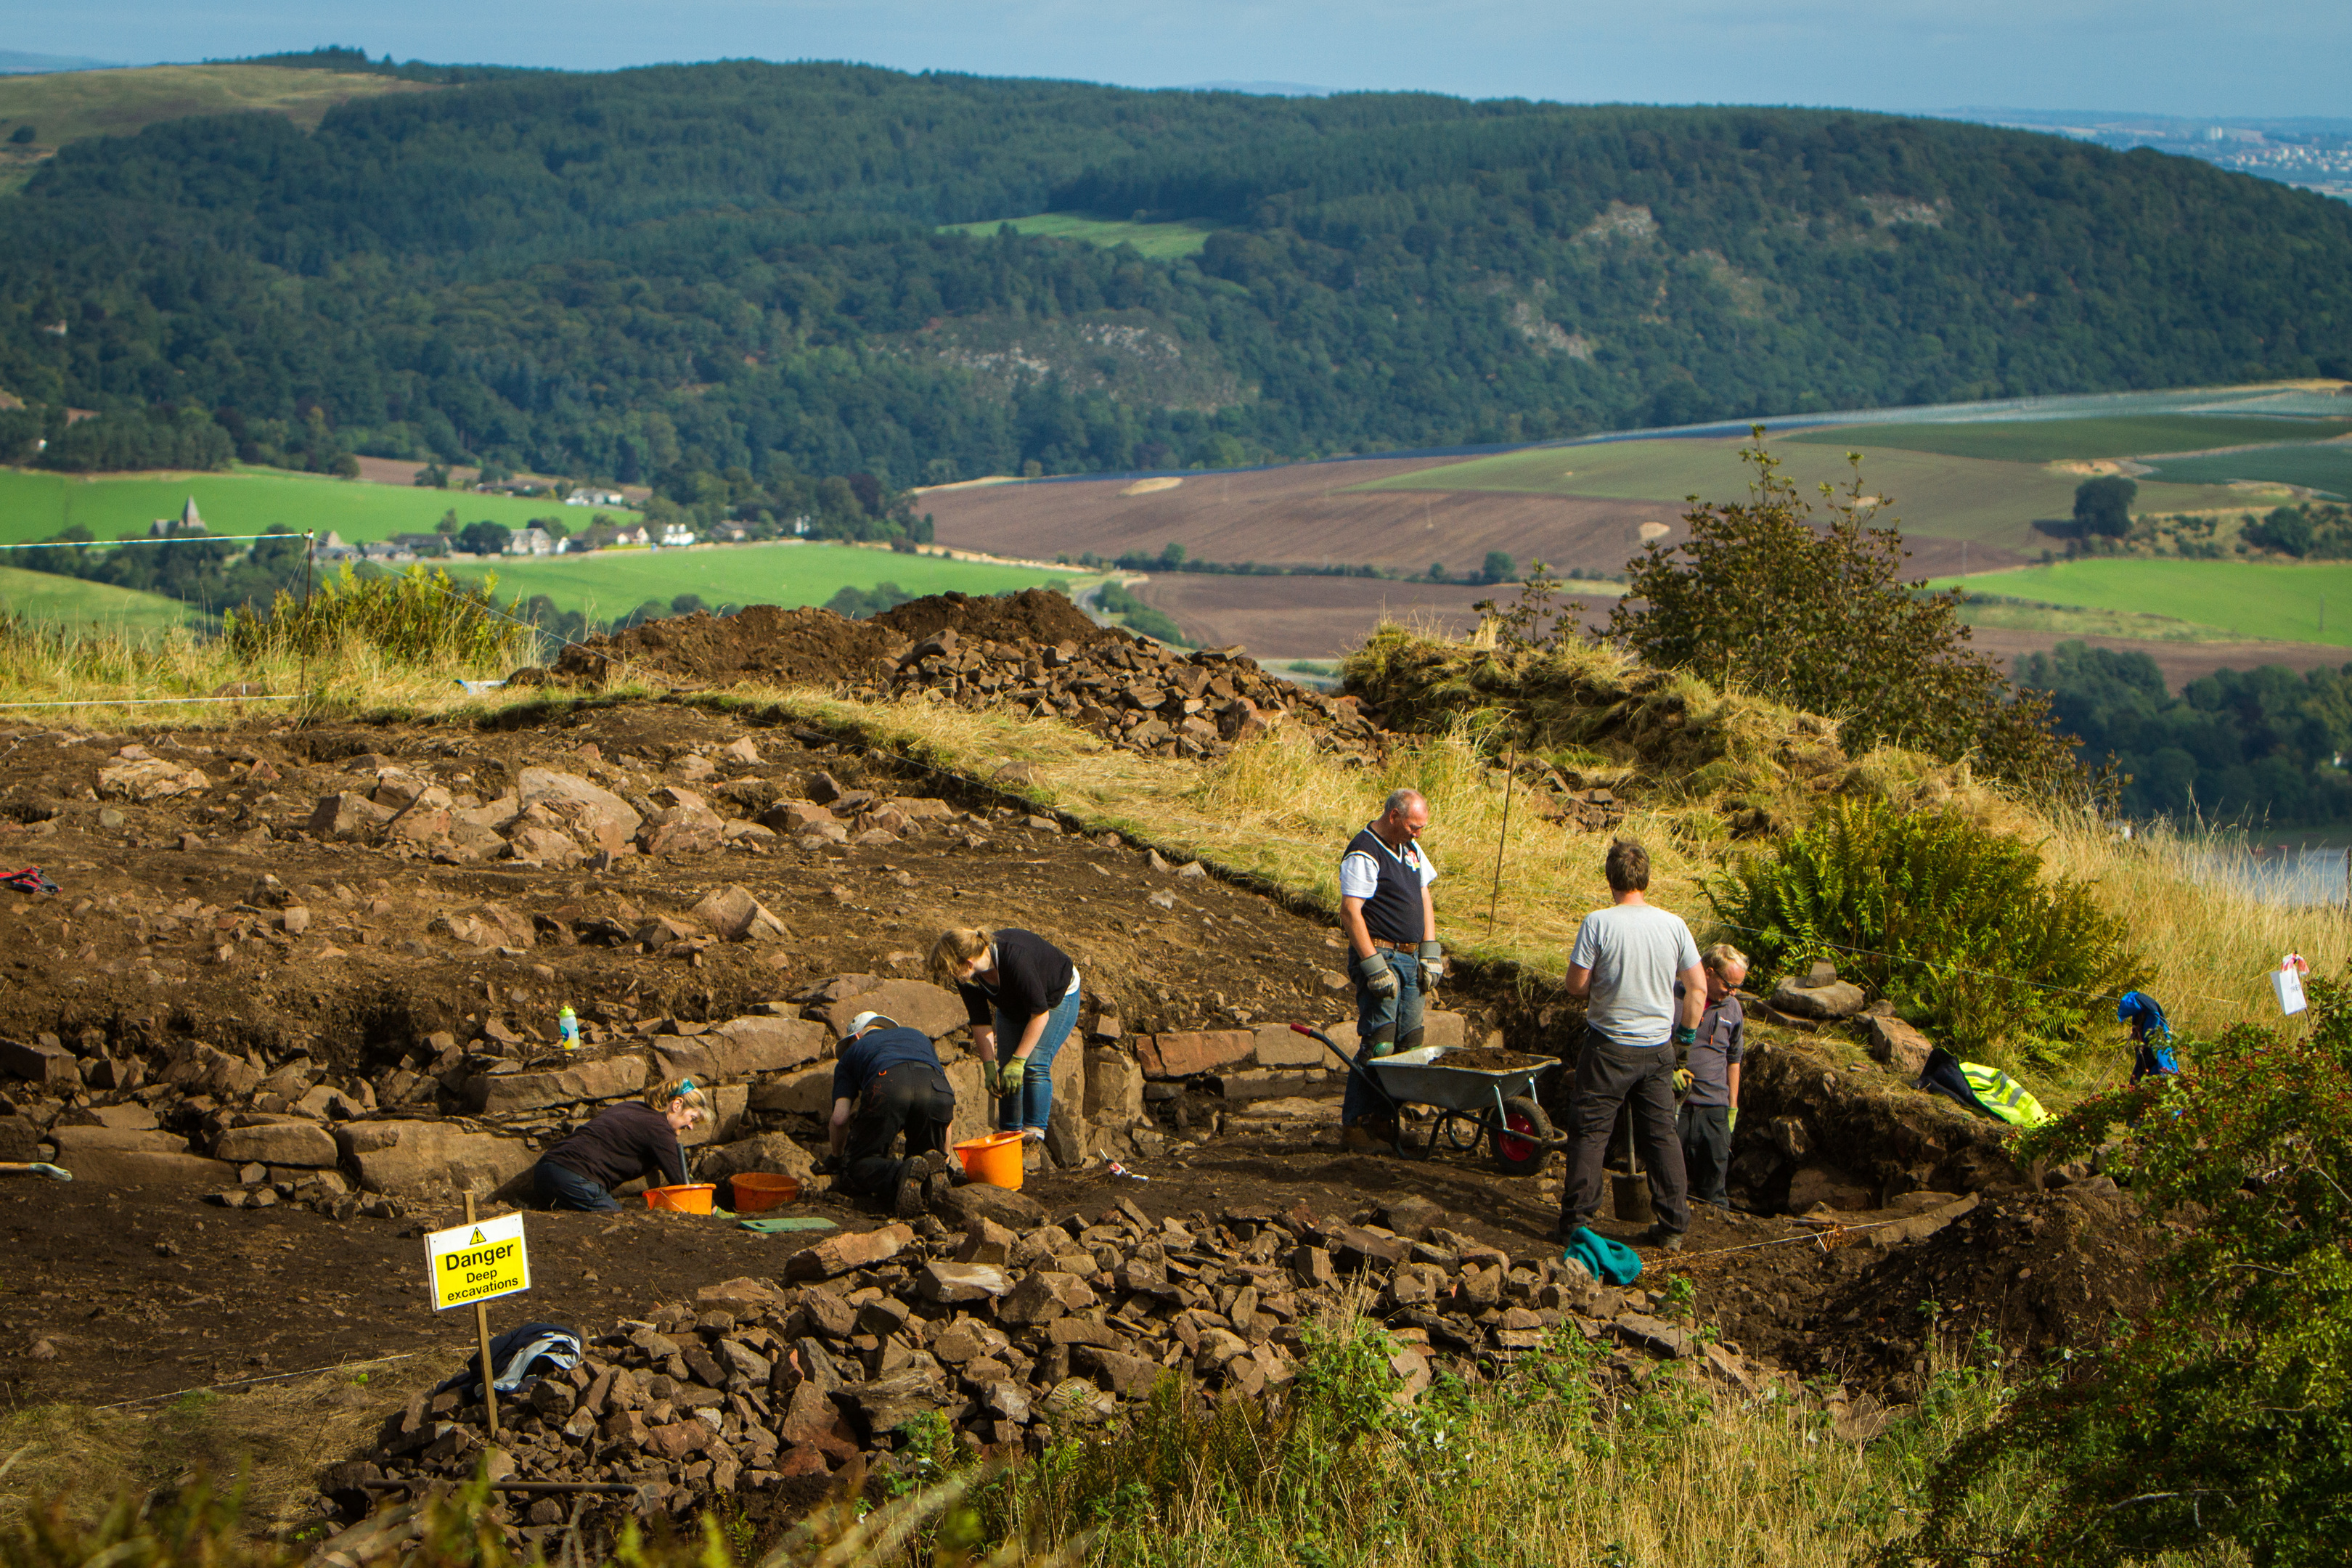 Children from St John's Academy take part in an archaeological dig at Moredun Top on Moncrieffe Hill in 2016.